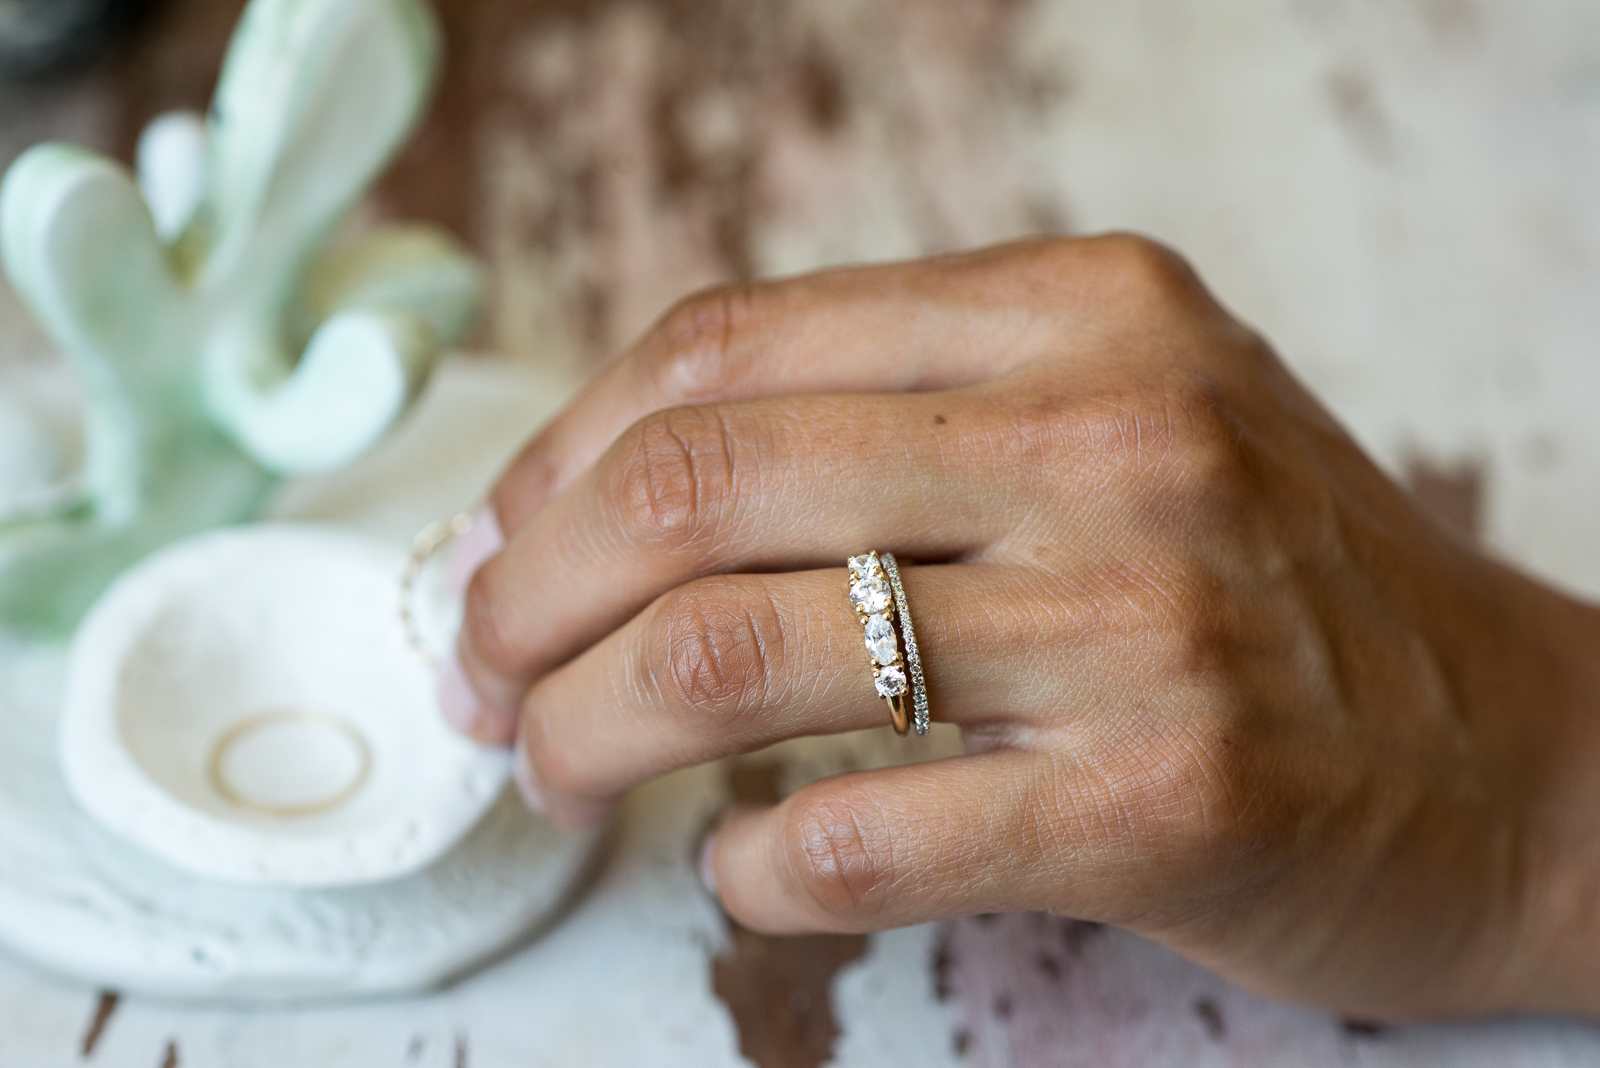 A beautiful ring delicately held by a woman's hand on a table.